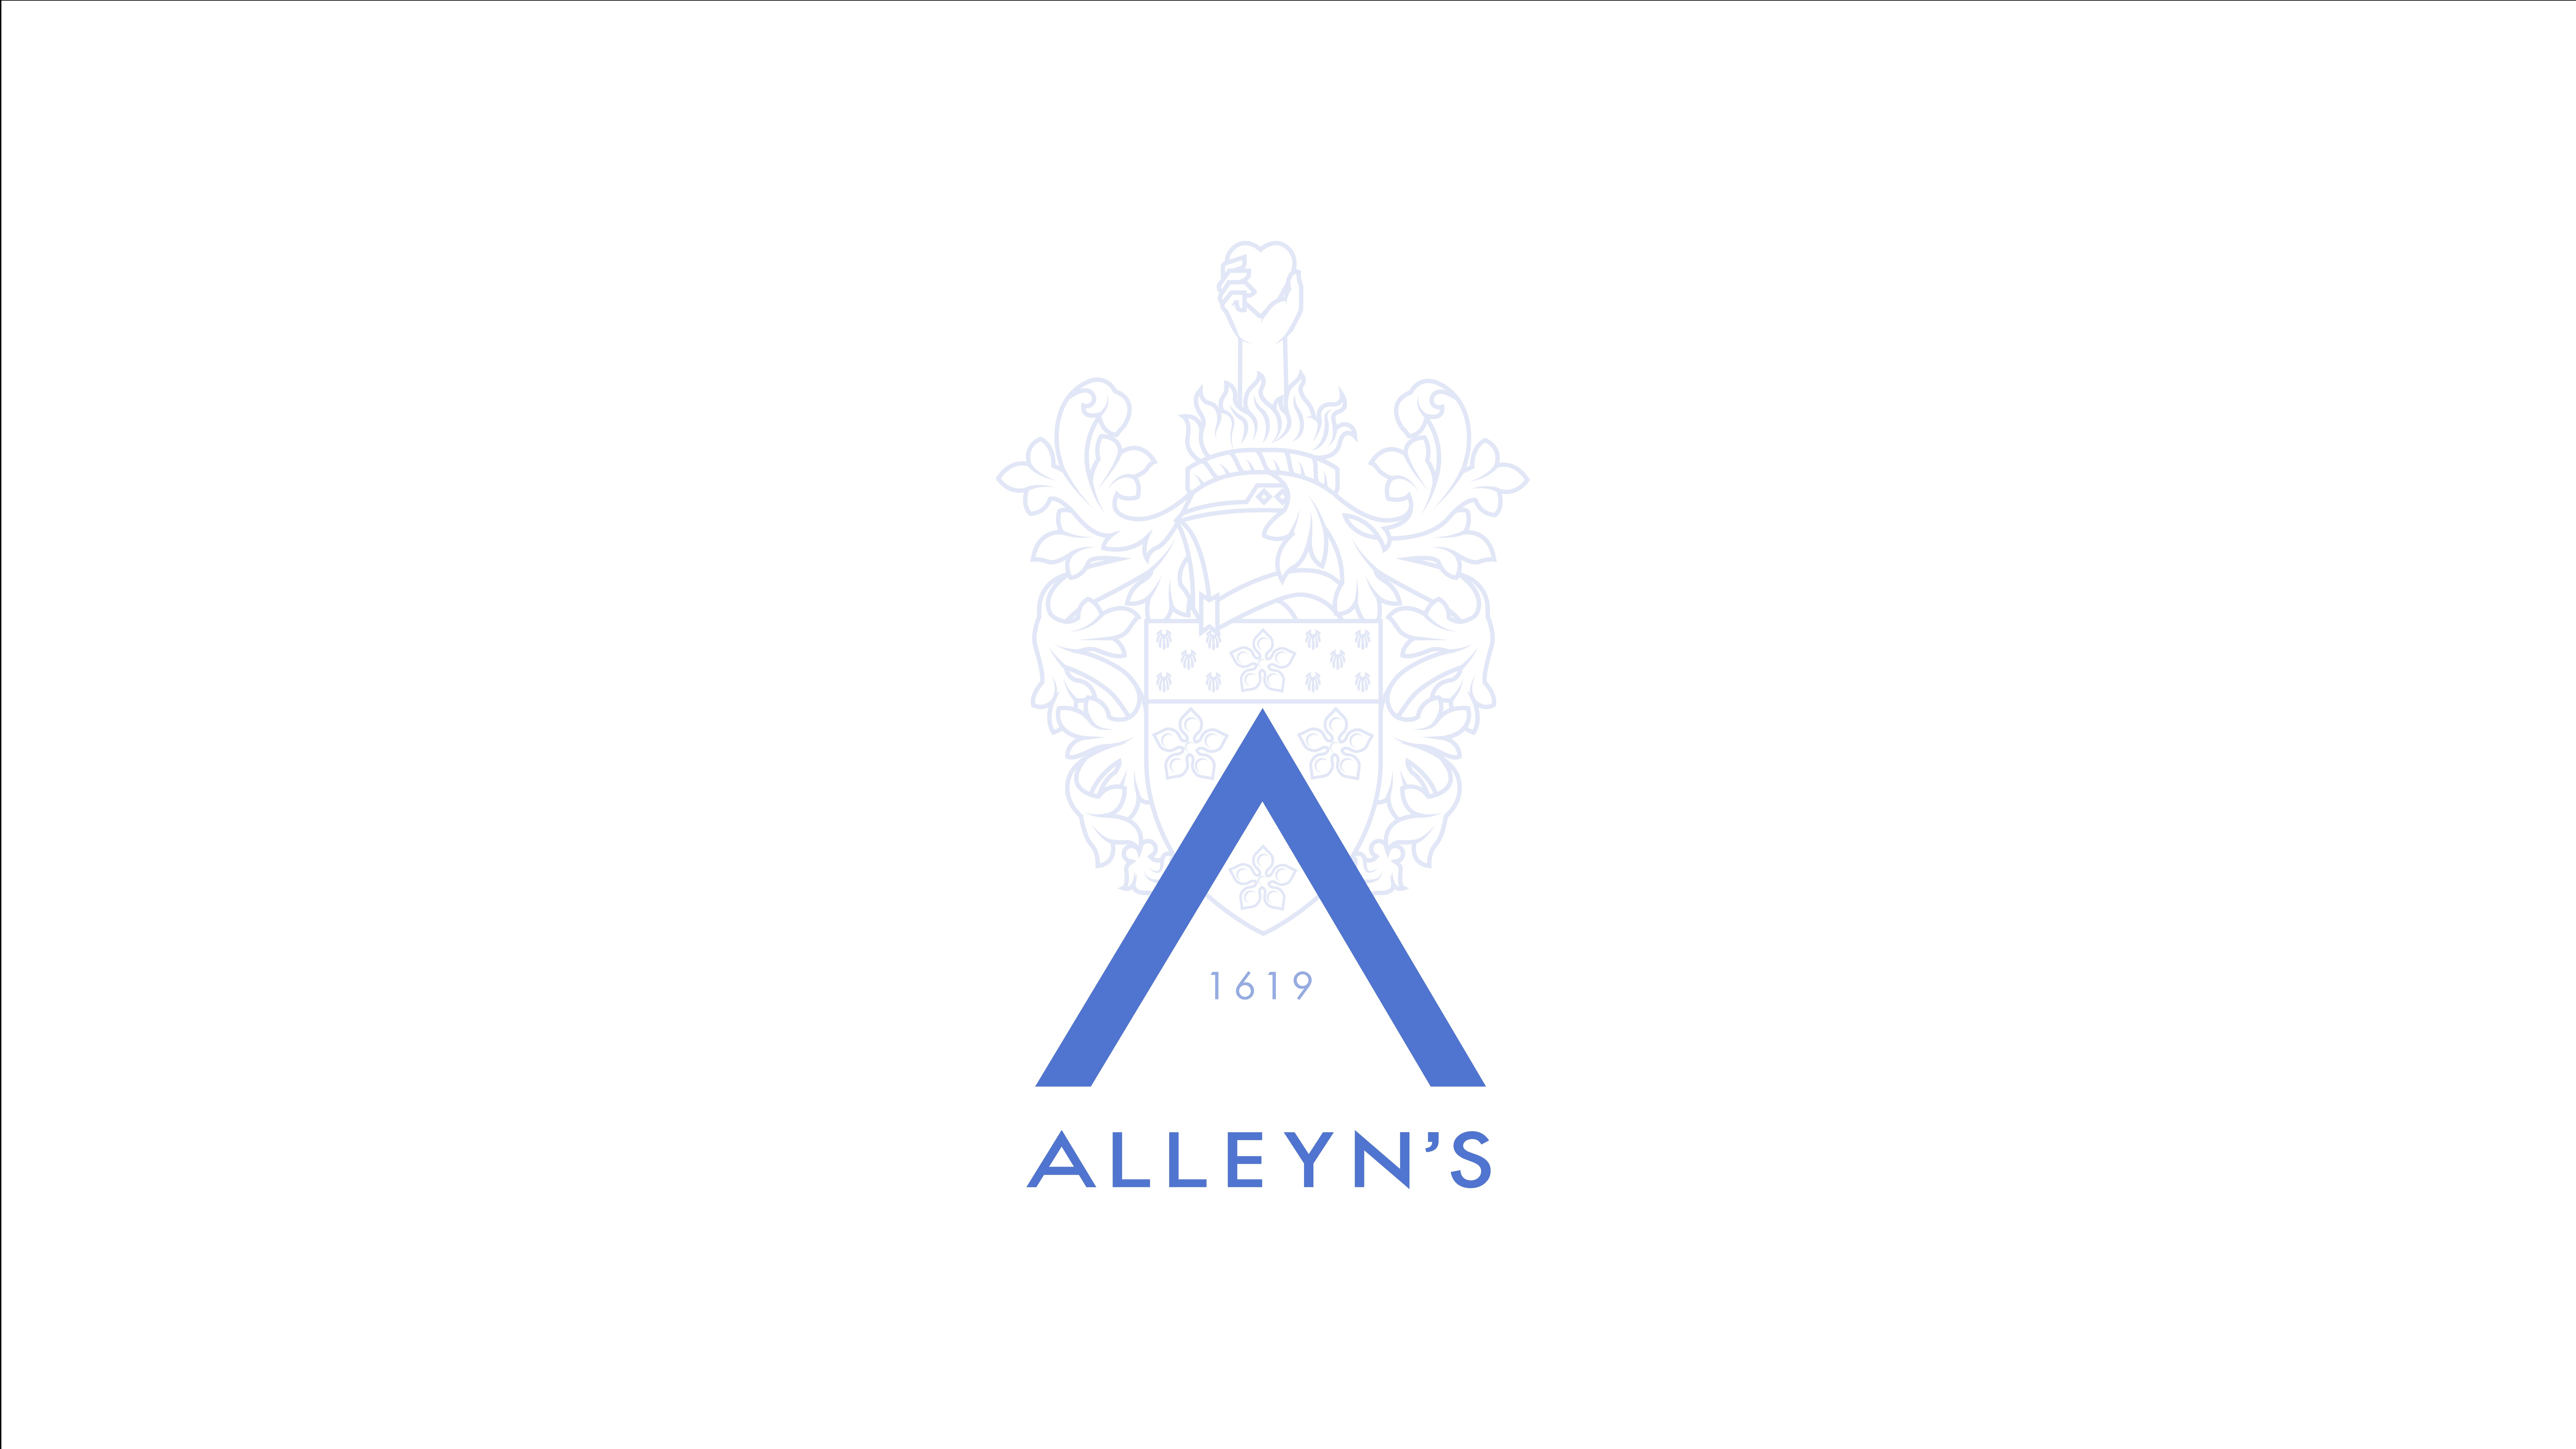 Renowned Independent School, Alleyn’s Reveals New Visual Identity Devised by Brand Elevation Agency, Free the Birds